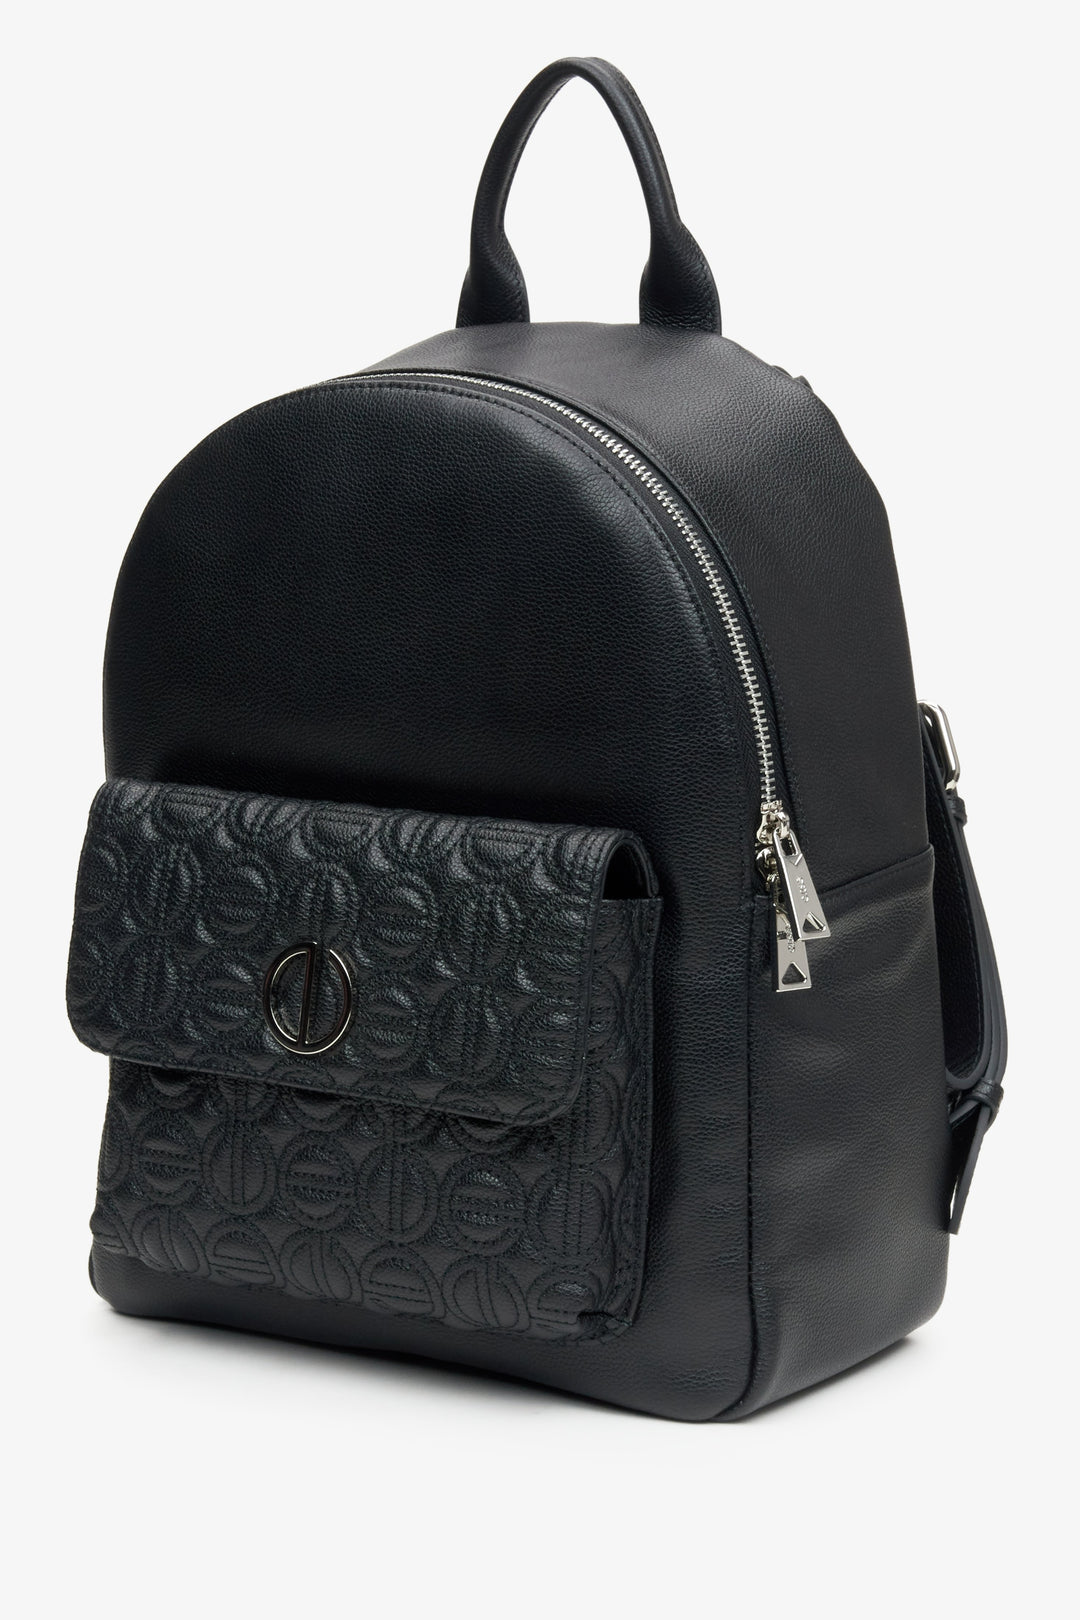 Women's black leather backpack by Estro.